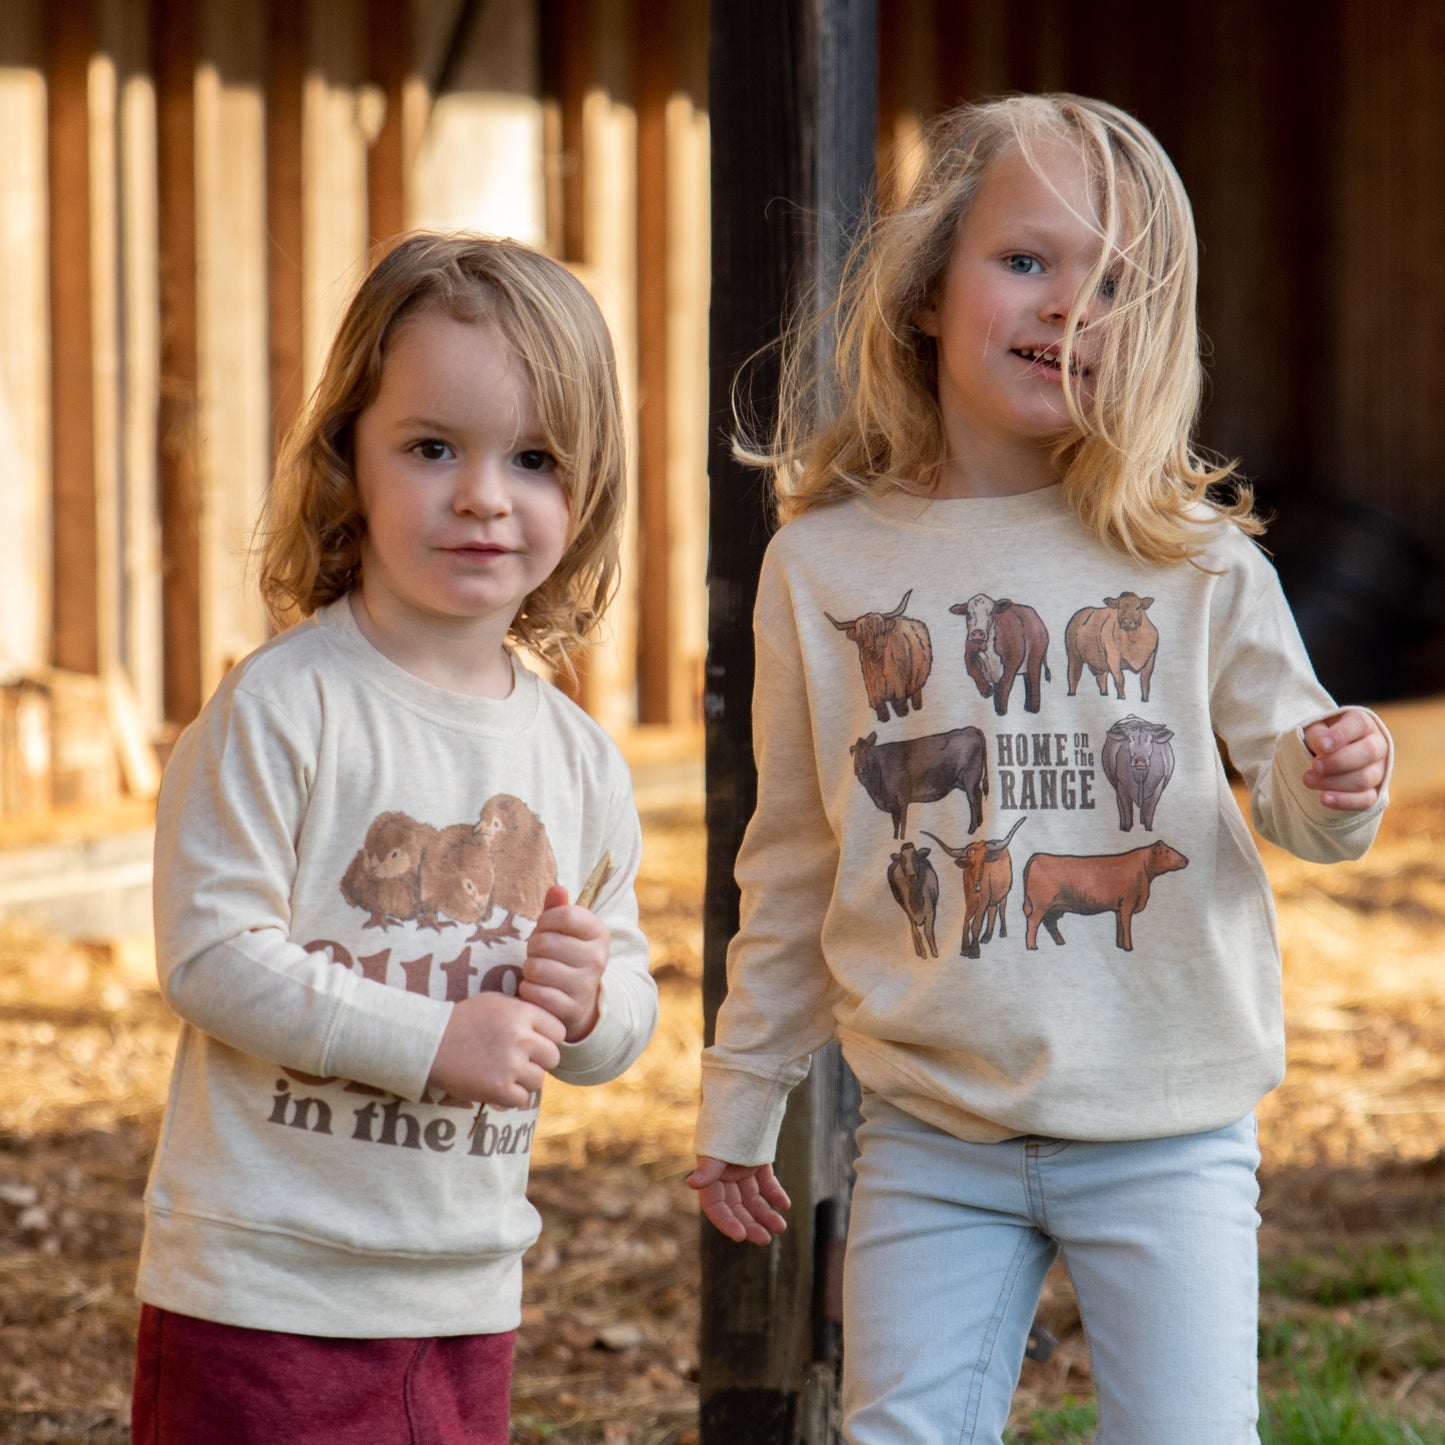 "Cutest Chick in the barn" Toddler Girl Beige Long Sleeve shirt